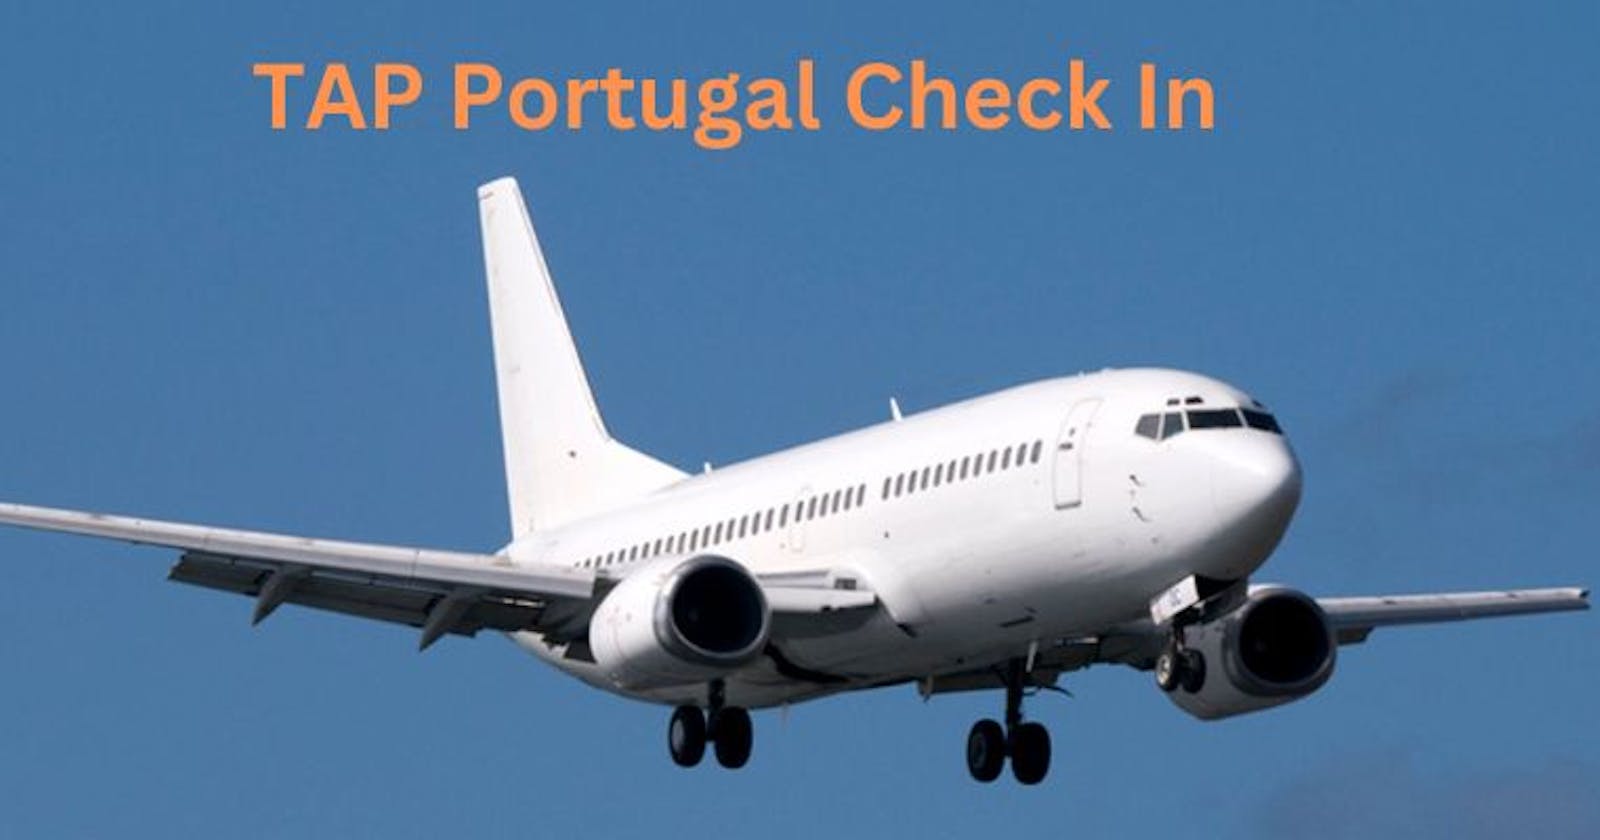 A Guide to the TAP Portugal Check In